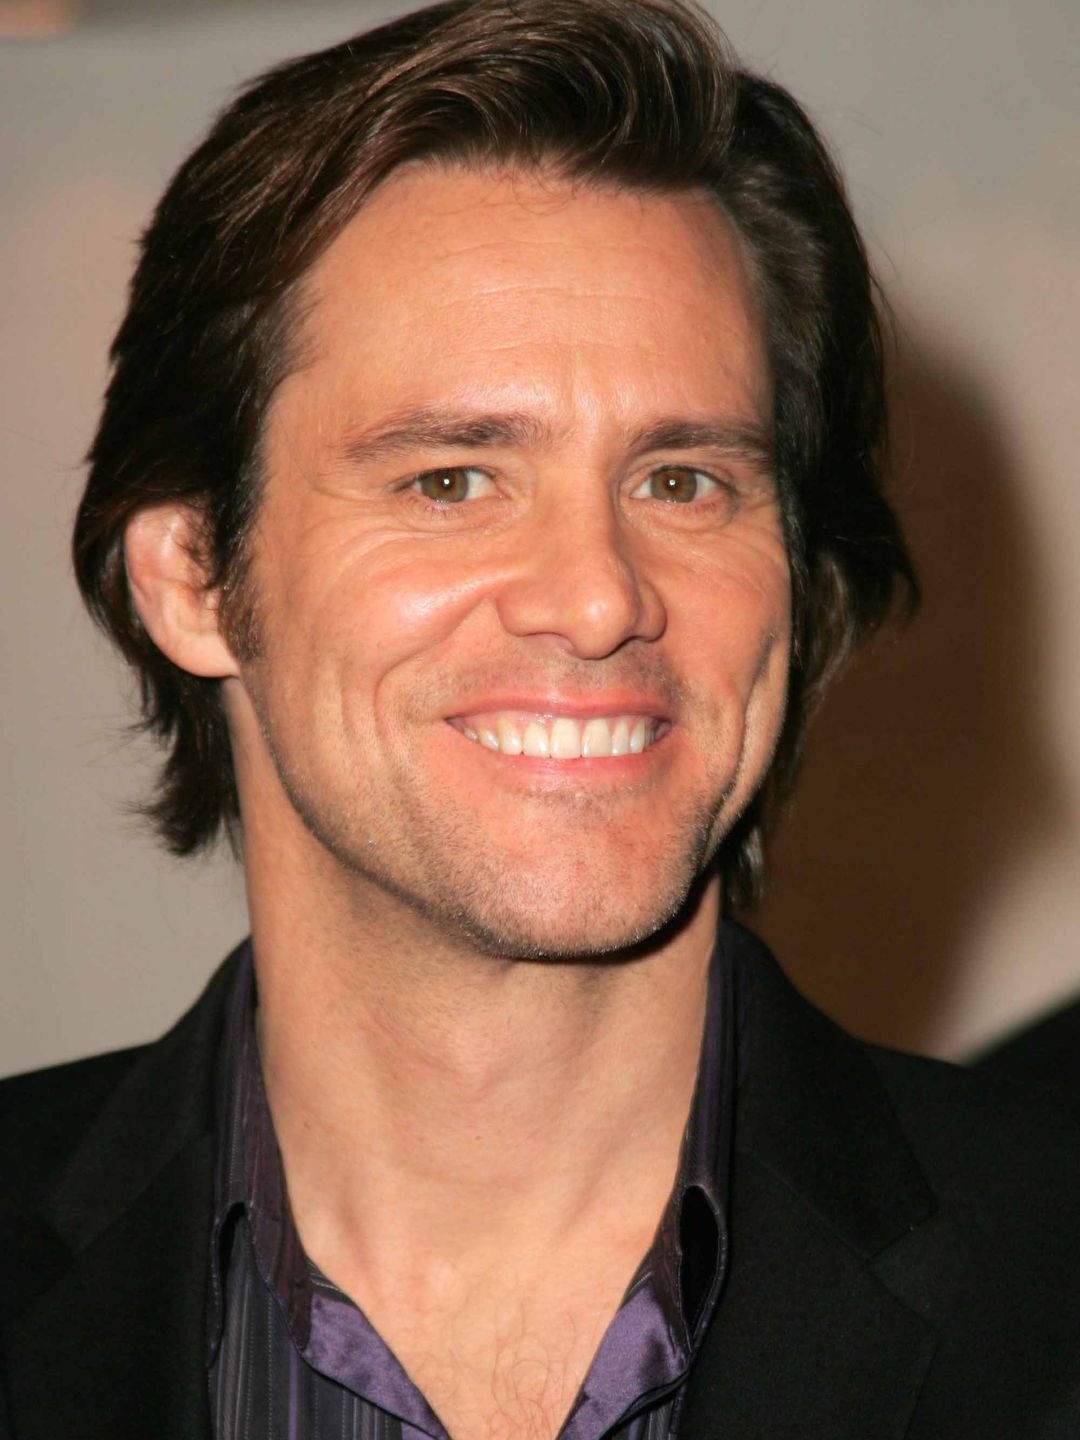 Jim Carrey does he have a wife